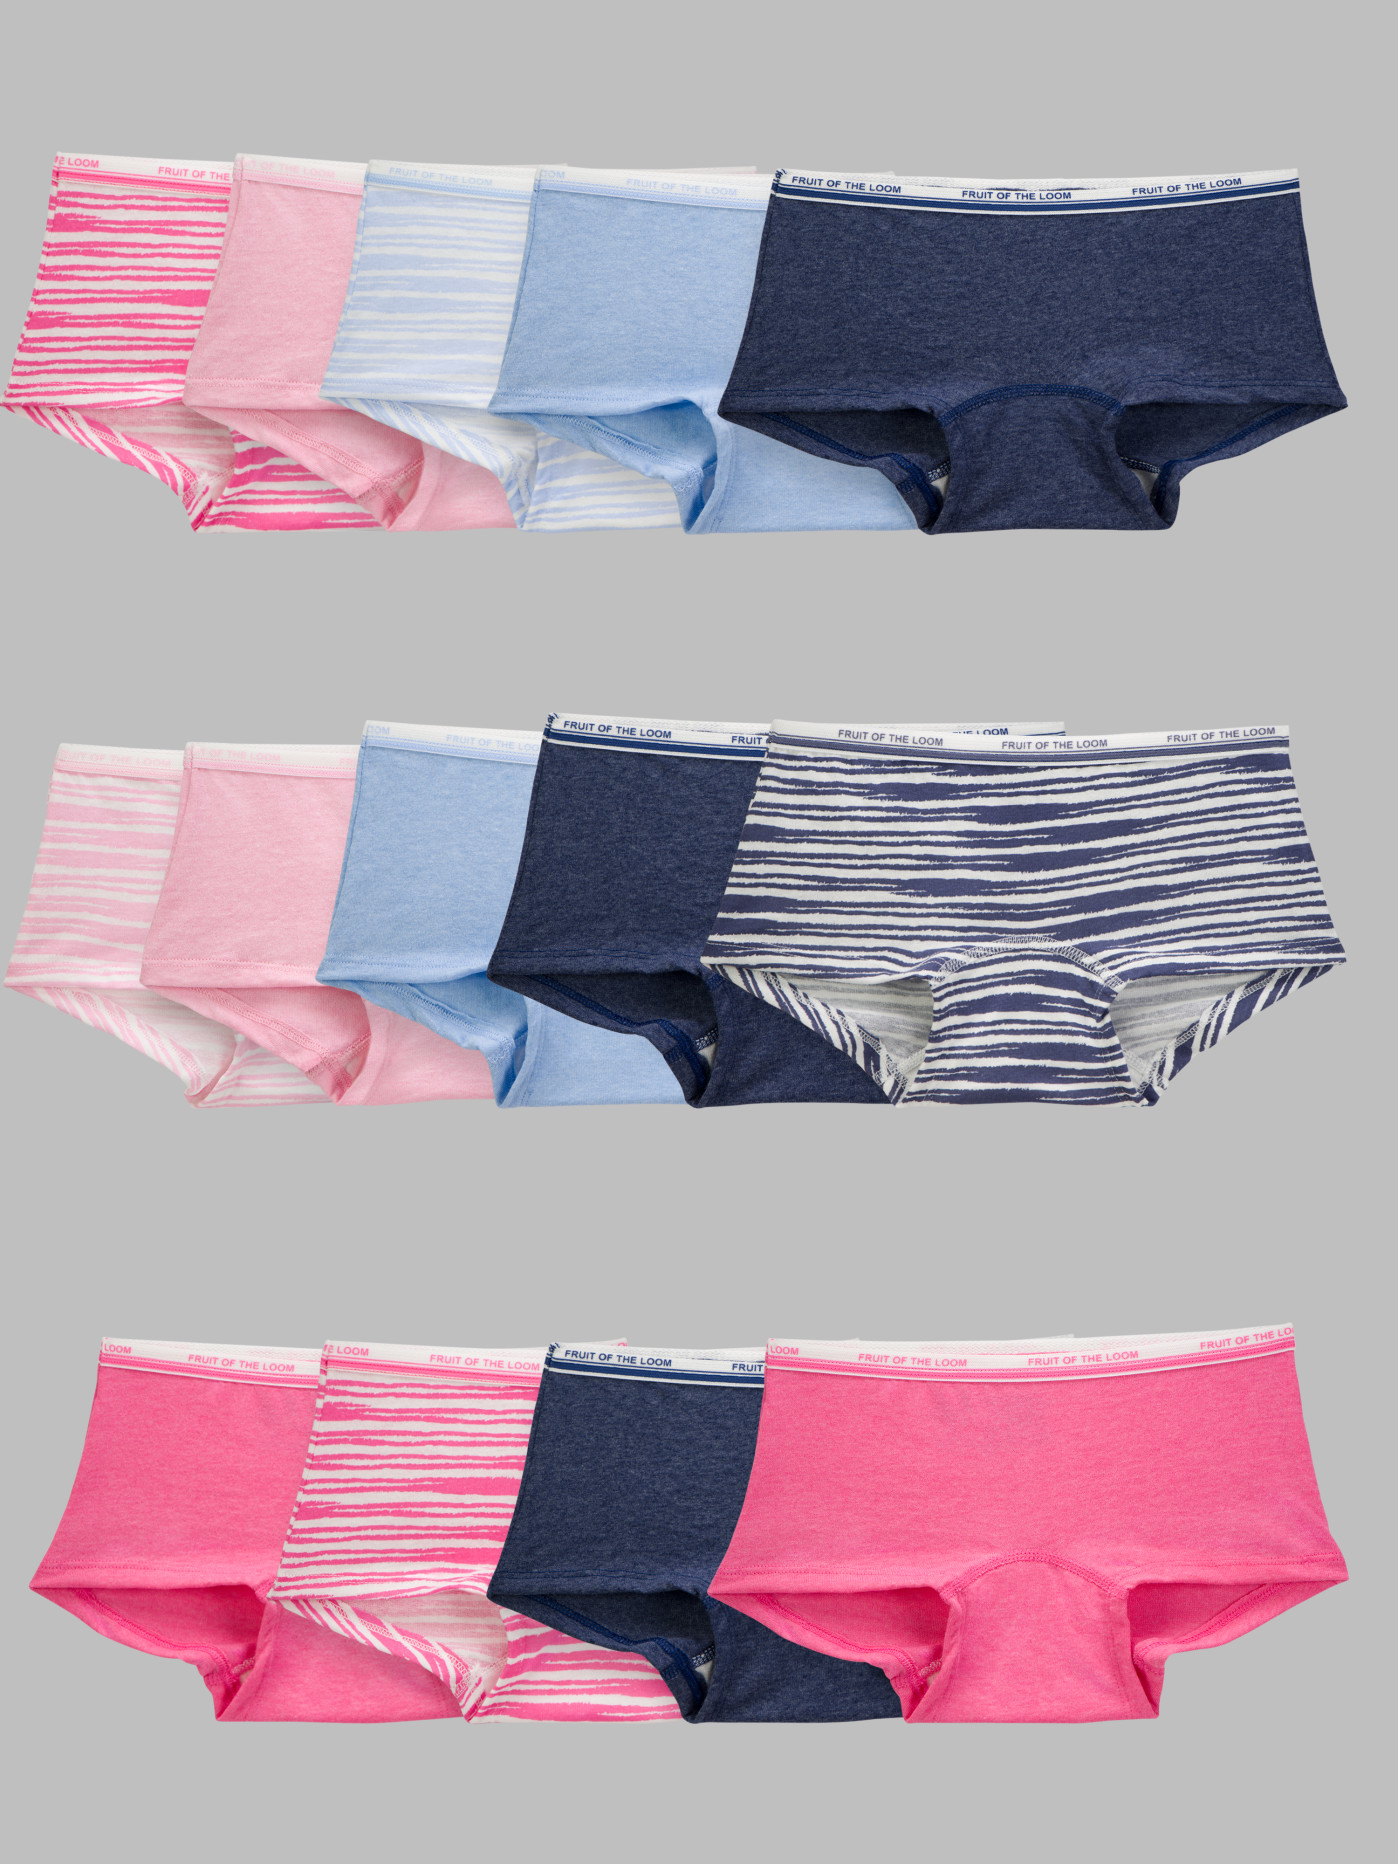 Girls Assorted Cotton Briefs 6-Pack - Size 14, Assorted - The